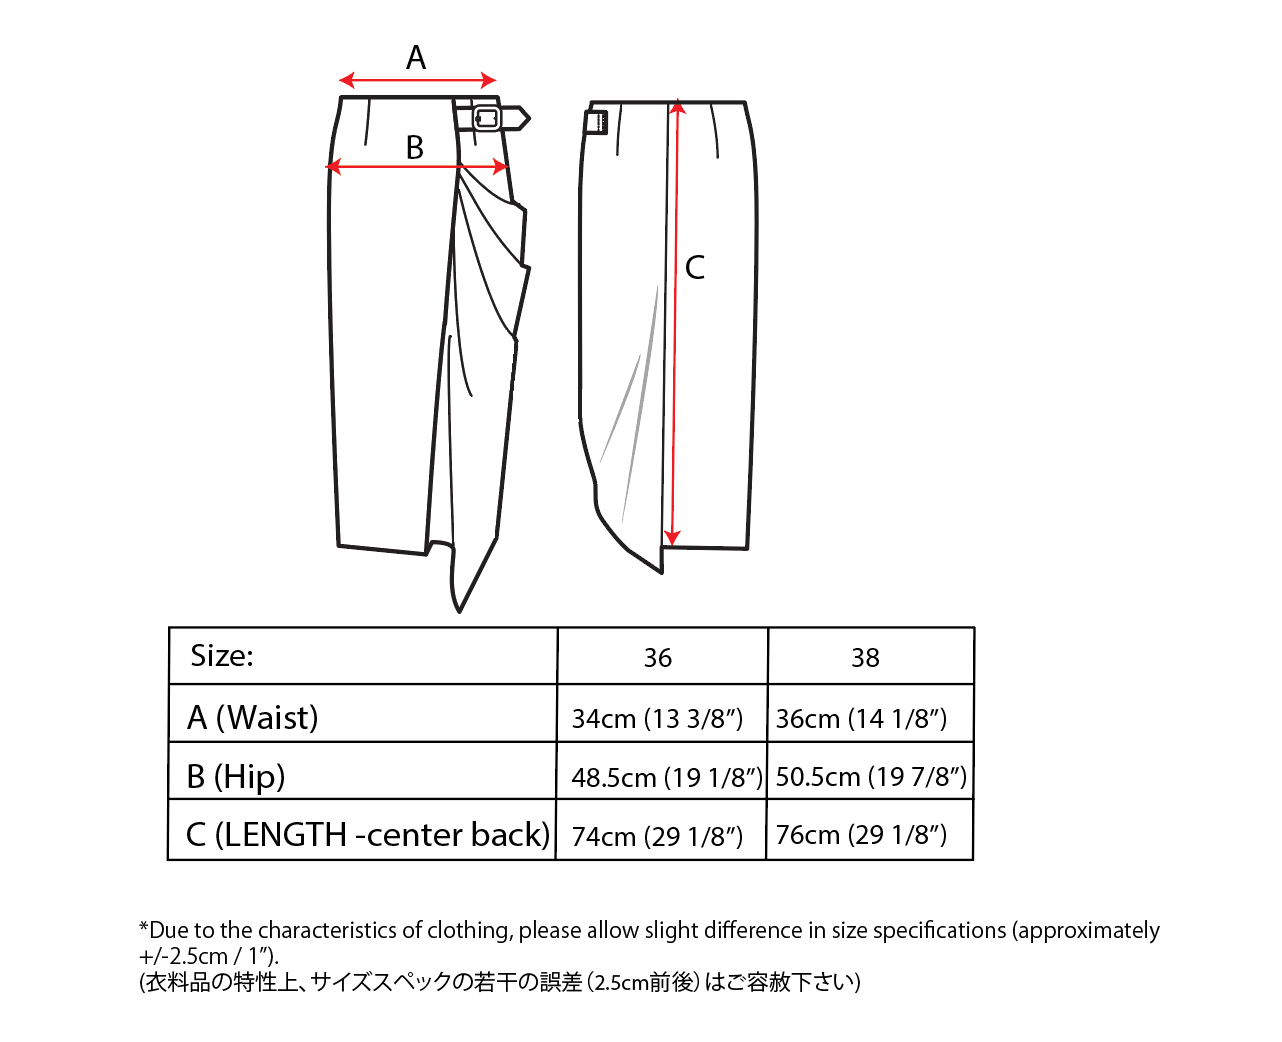 Technical diagram showing two side views of a Maison Lilli Jodie Sparkling Satin Asymmetrical Draped Skirt with labeled measurements for size 36 and 38 in centimeters at the waist and length, and a note on size adjustments.